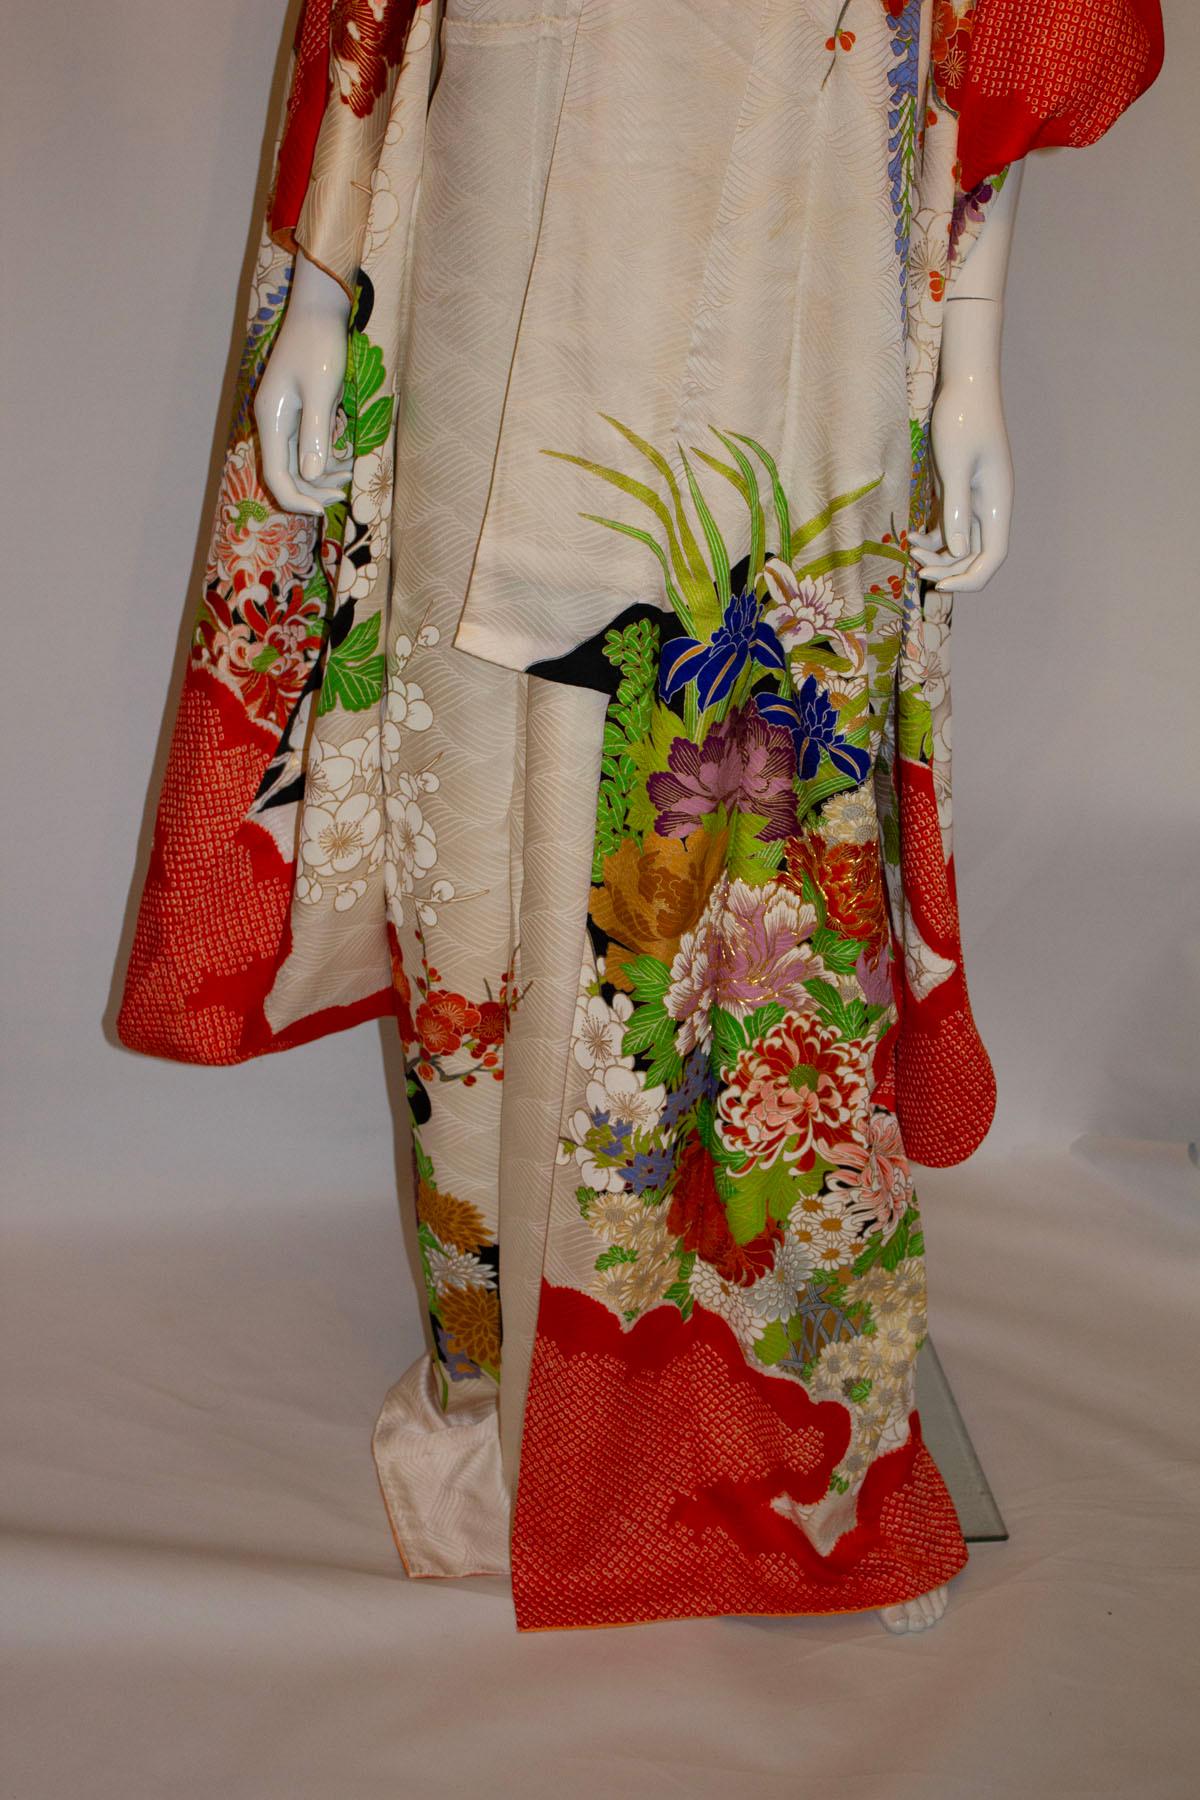 A headturning vintage kimono, with a multicolour floral basket design. The kimono has orange colour at the hem, and gold details around the petals. Measurements:
Bust up to 48'', length 62''